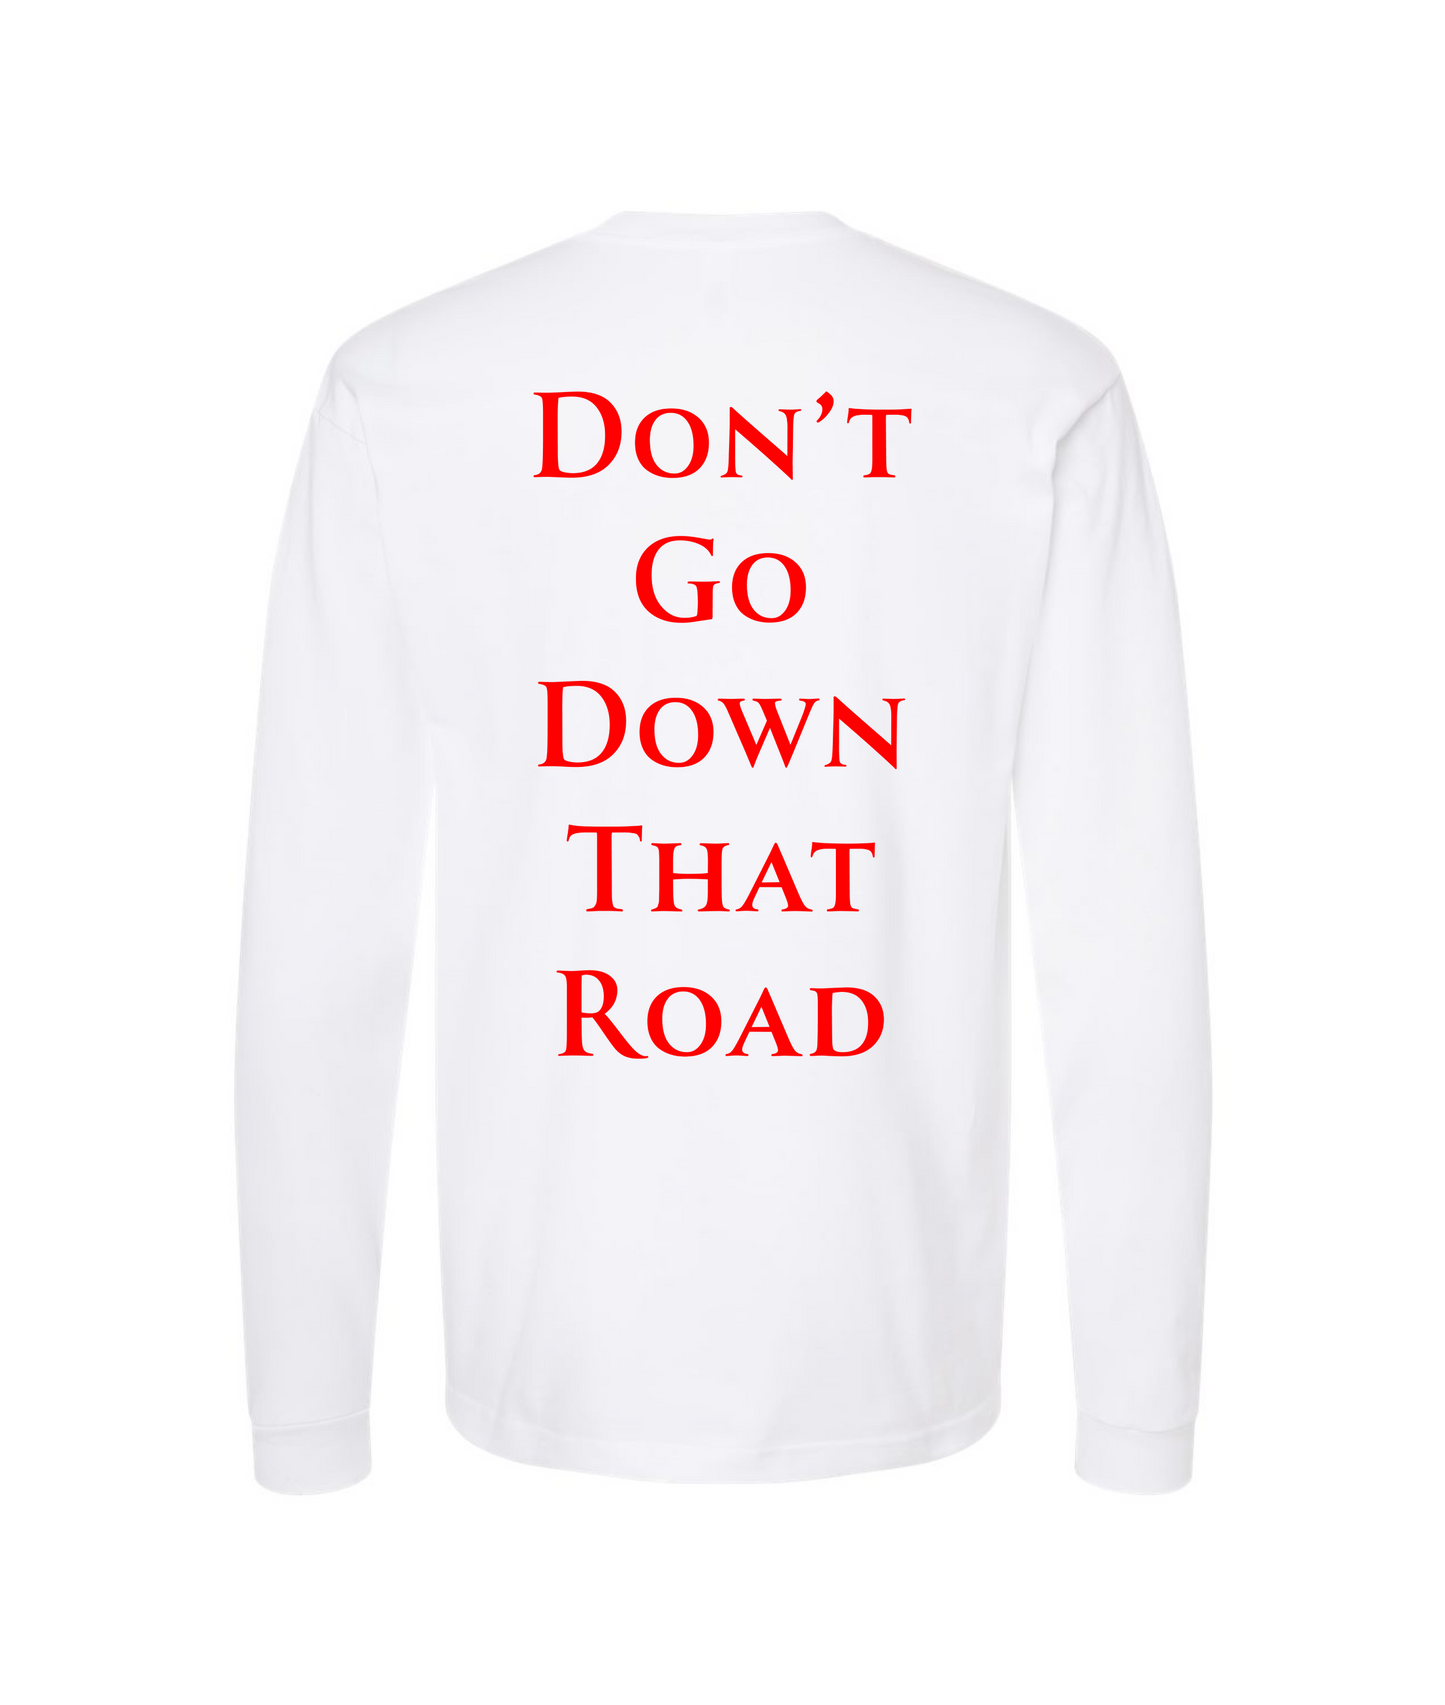 Seglock - DON'T GO DOWN THAT ROAD - White Long Sleeve T